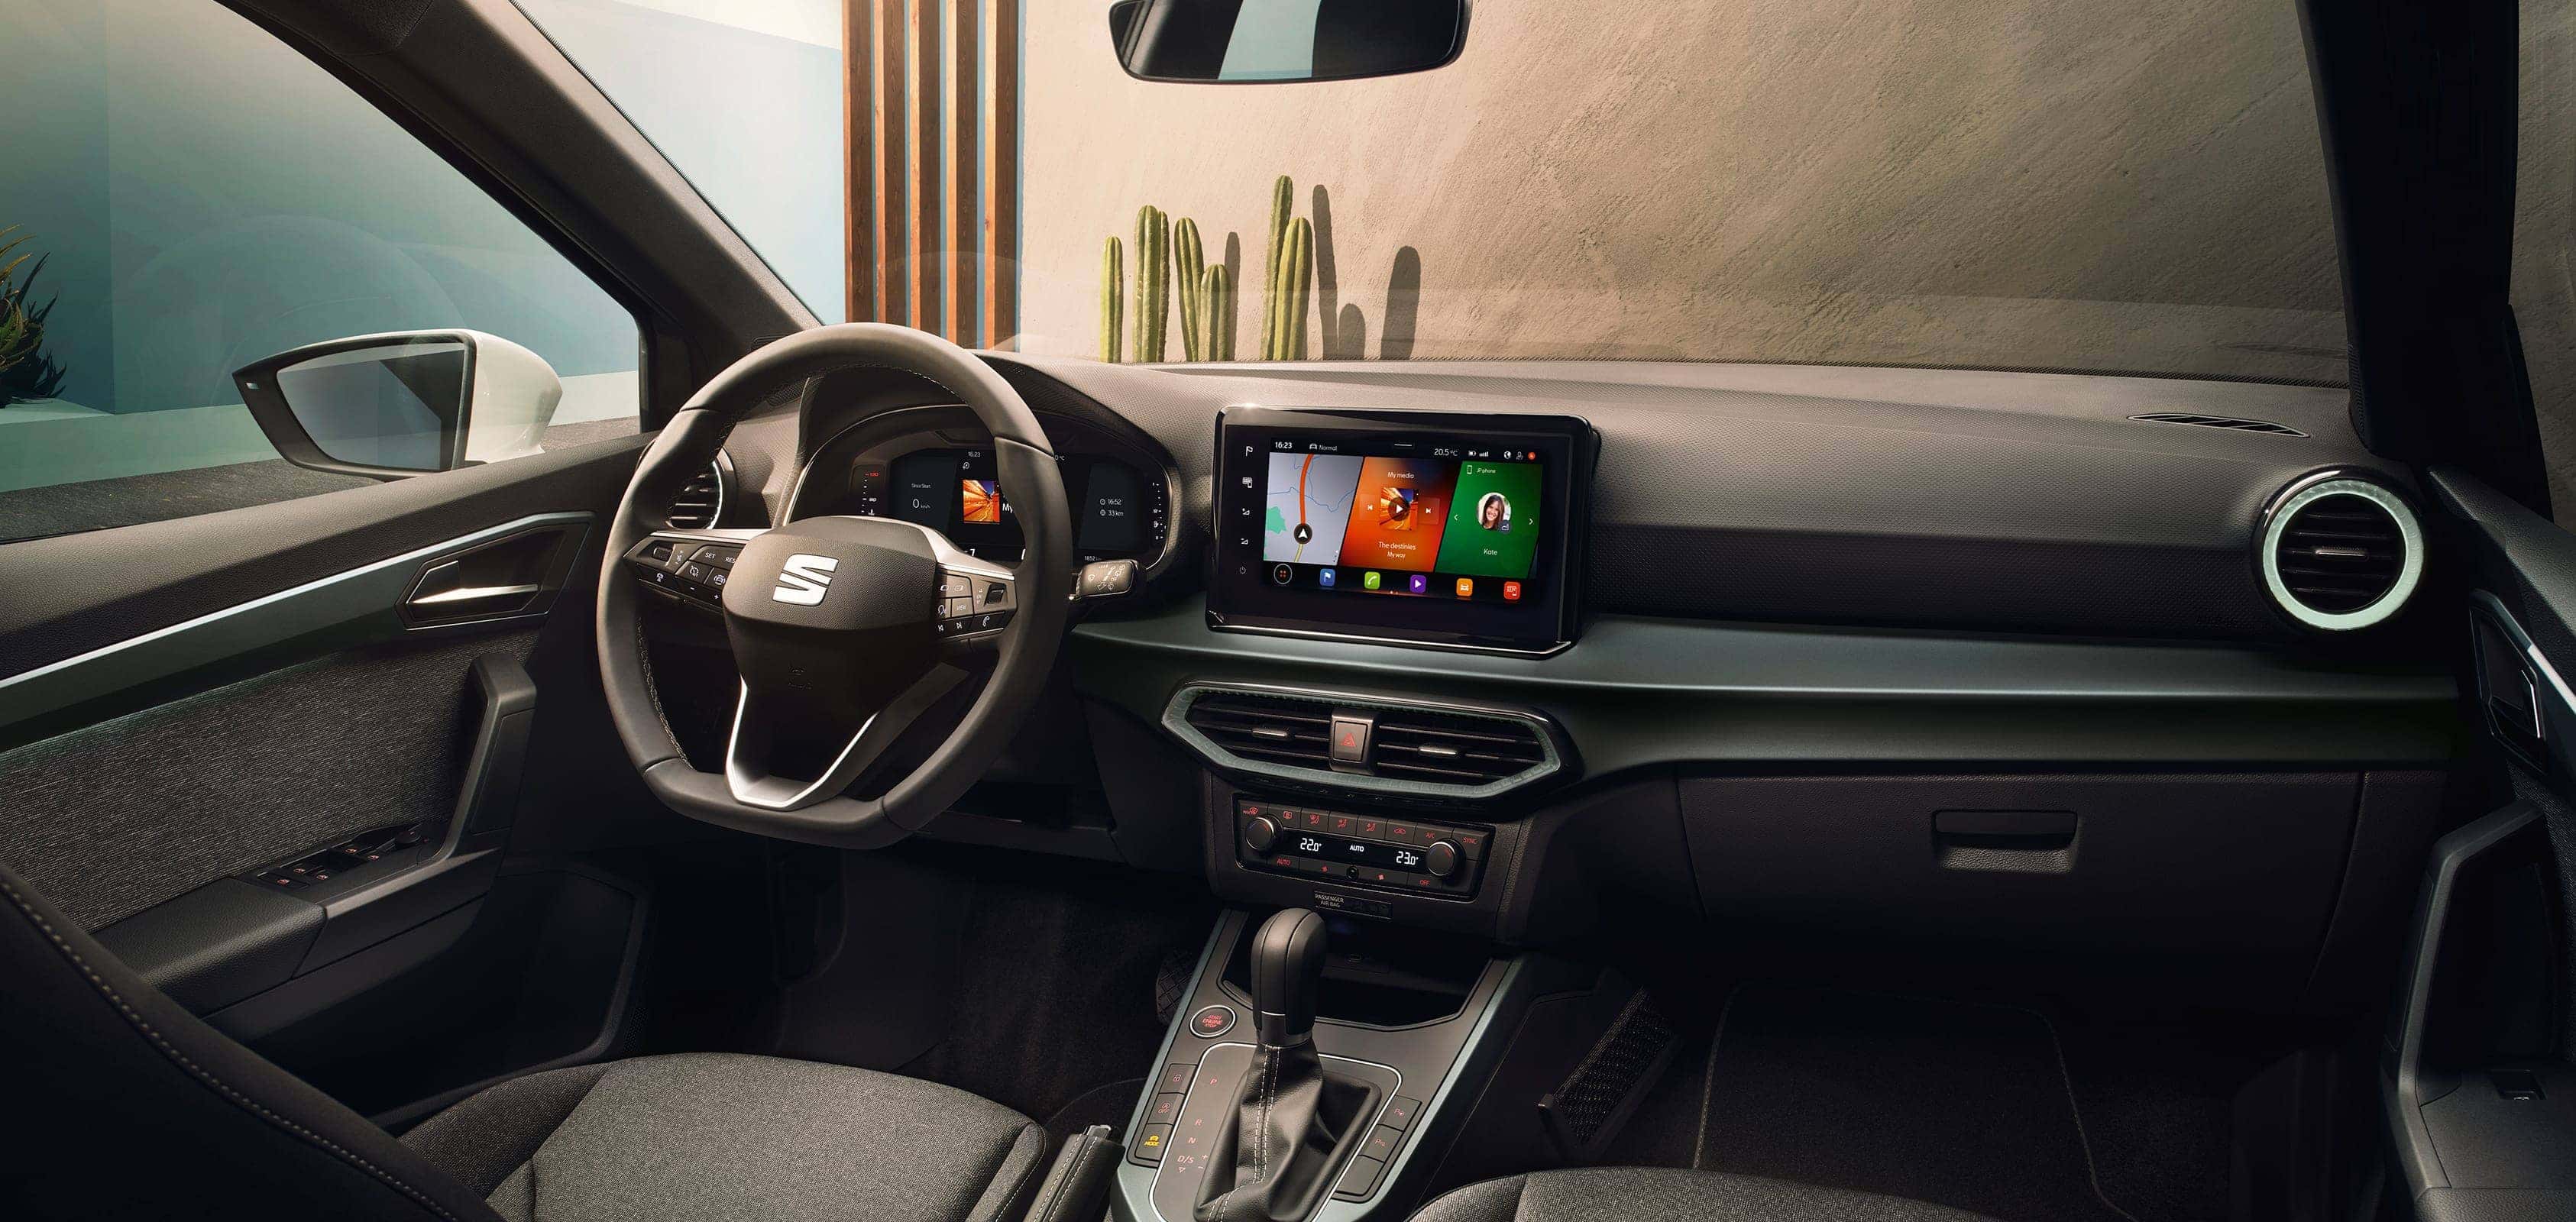 SEAT Arona interior view of the steering wheel and infotainment screen